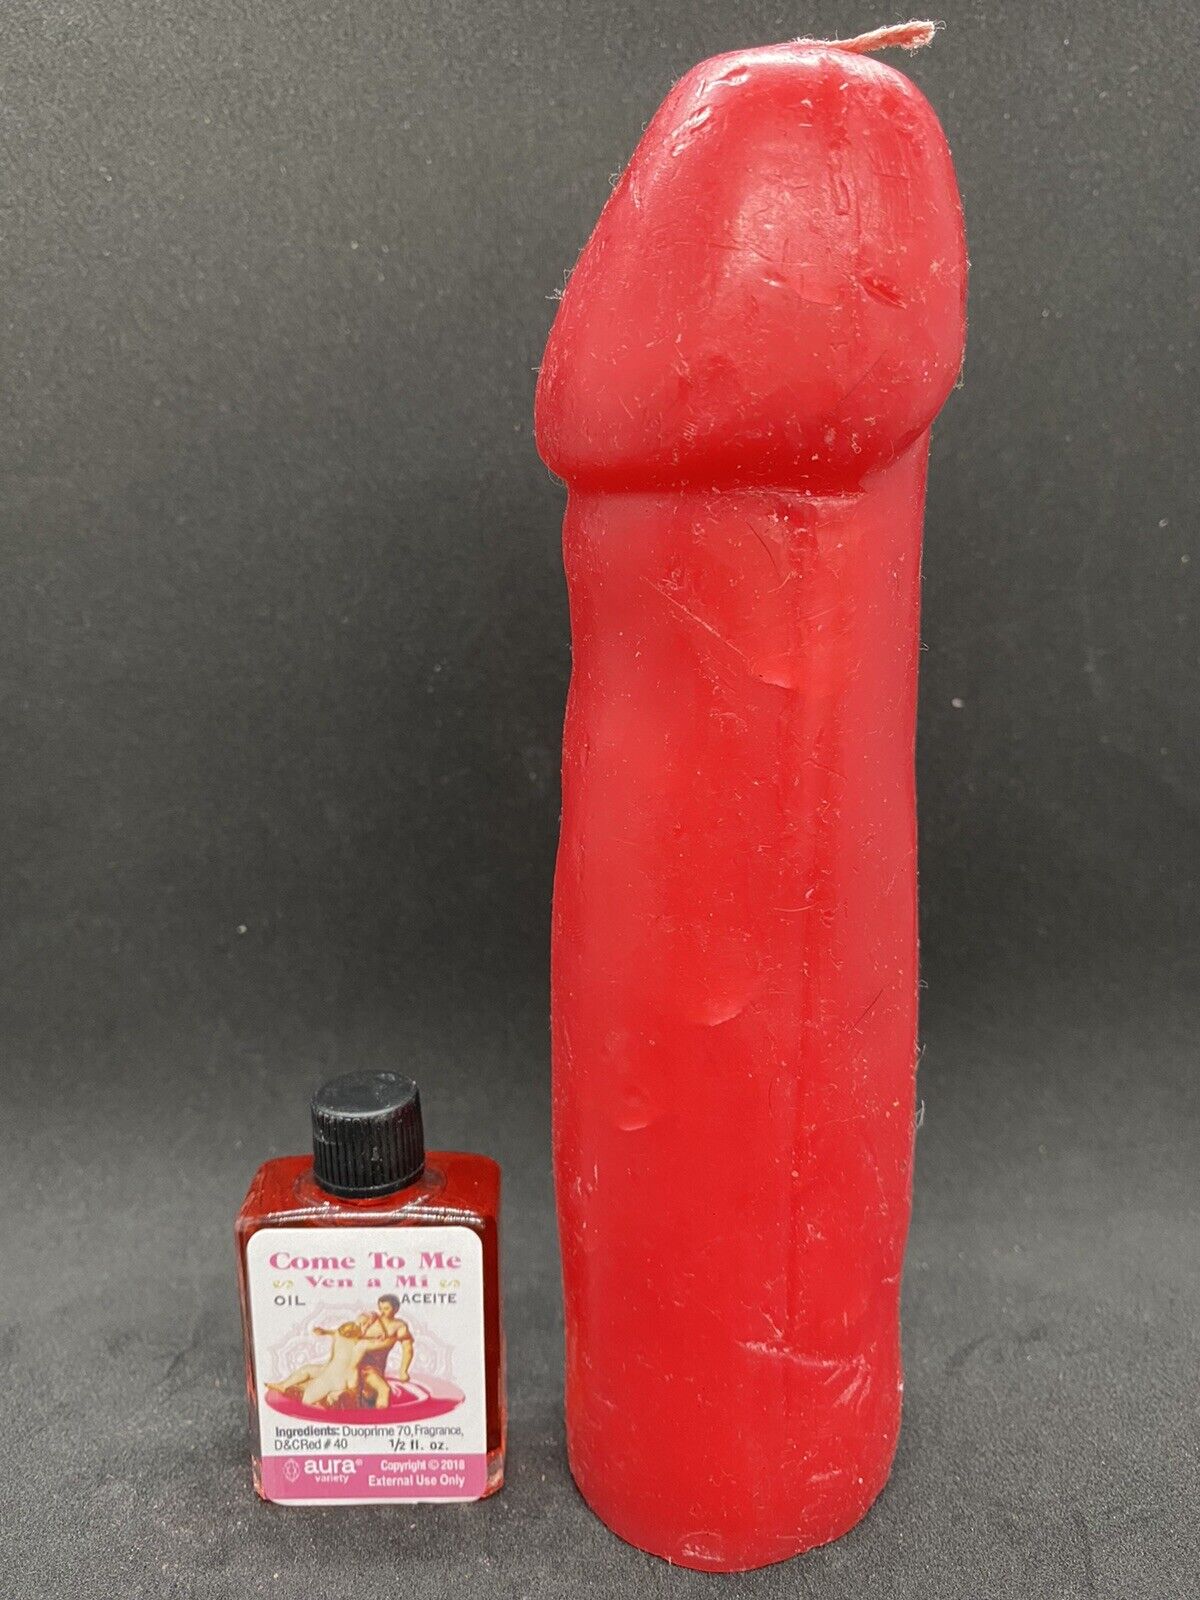 Red Penis Candle with Come To Me  Oil